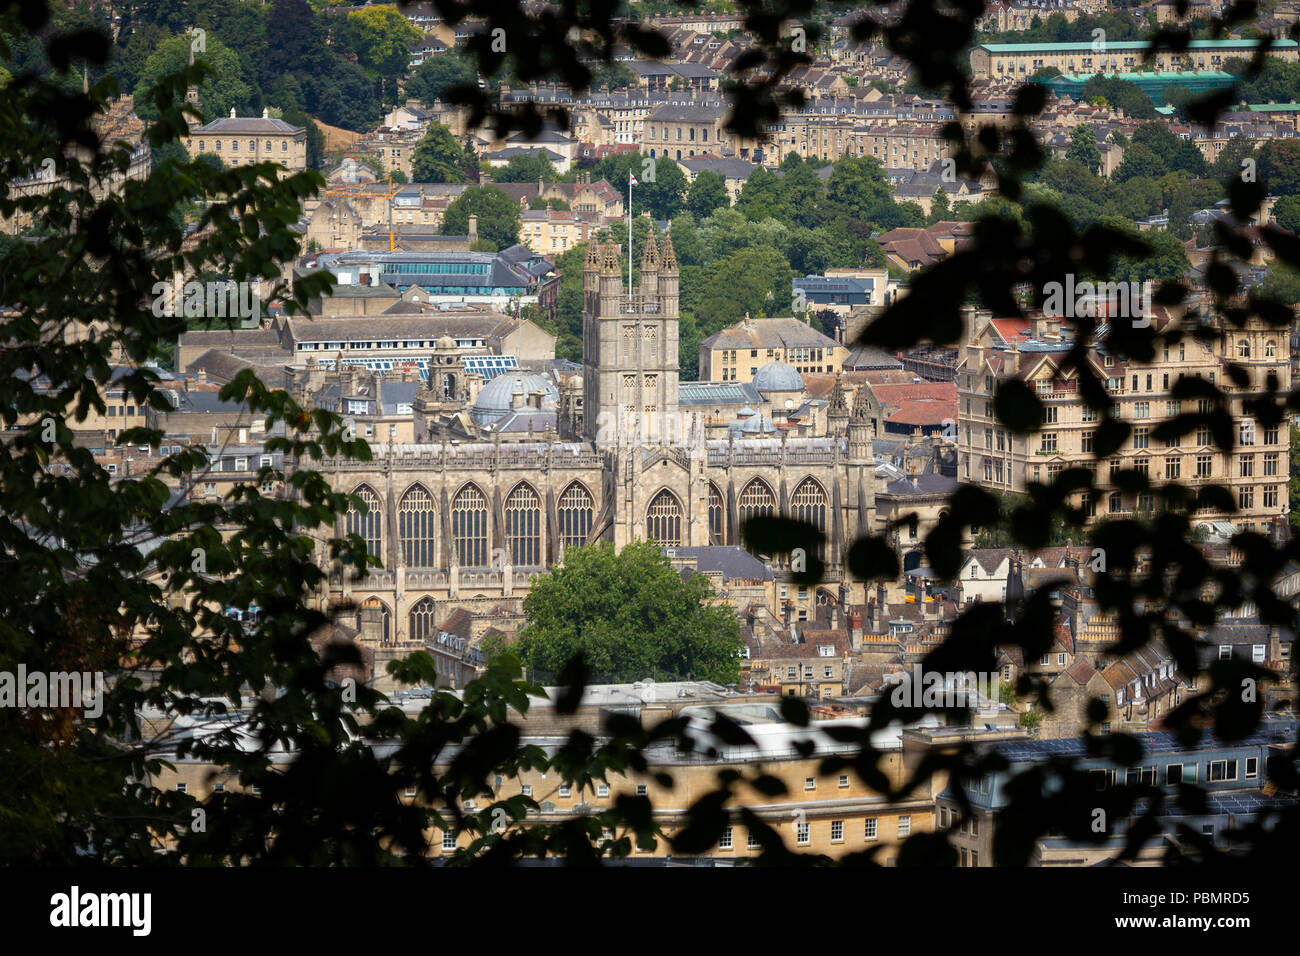 Bath Abbey seen through trees from a high viewpoint above the City of Bath in England Stock Photo